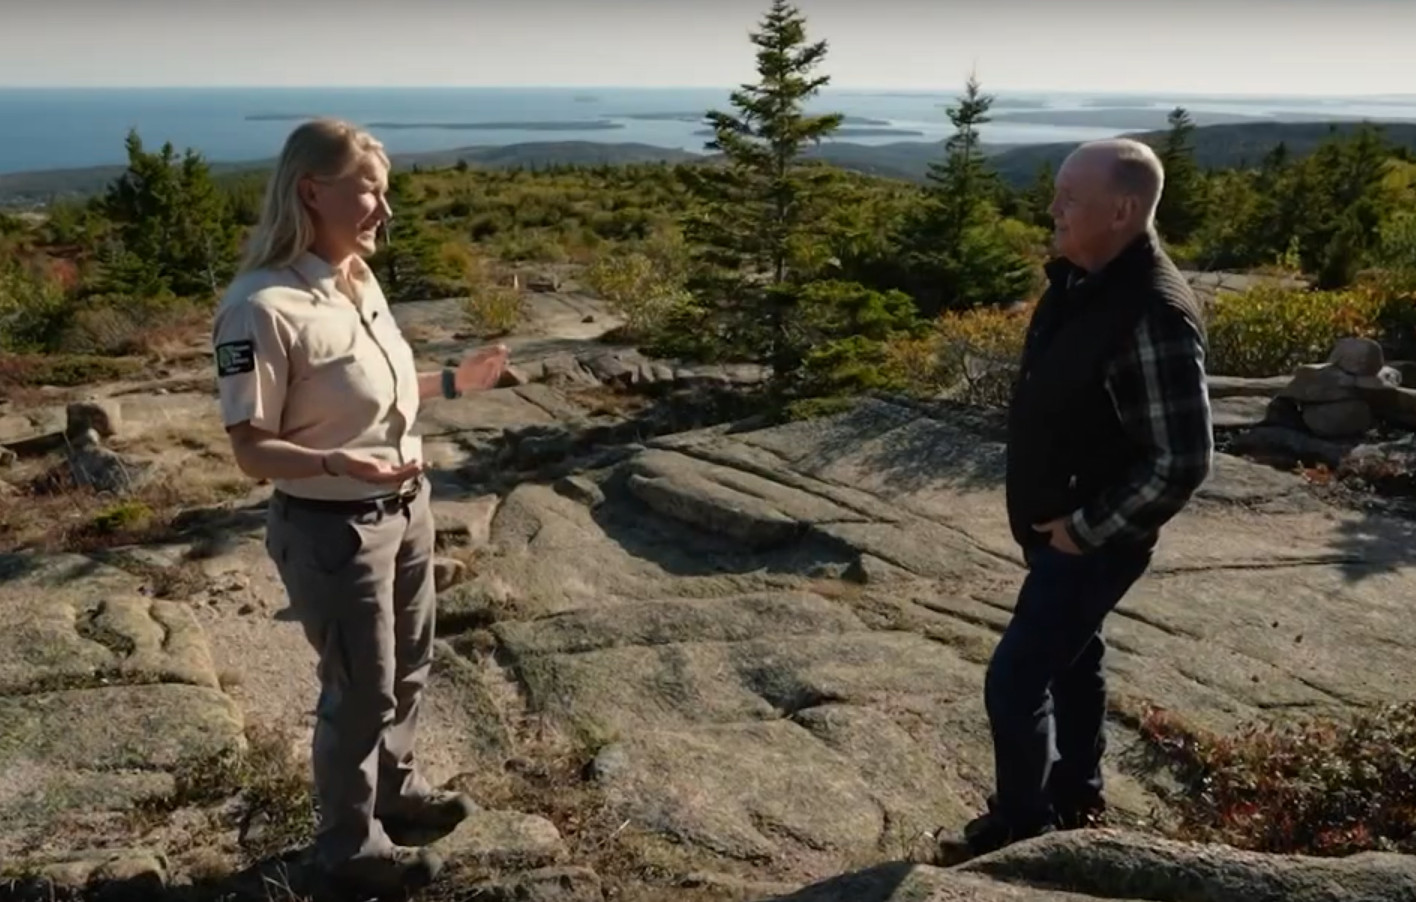 Two people stand talking on a granite summit overlooking the ocean